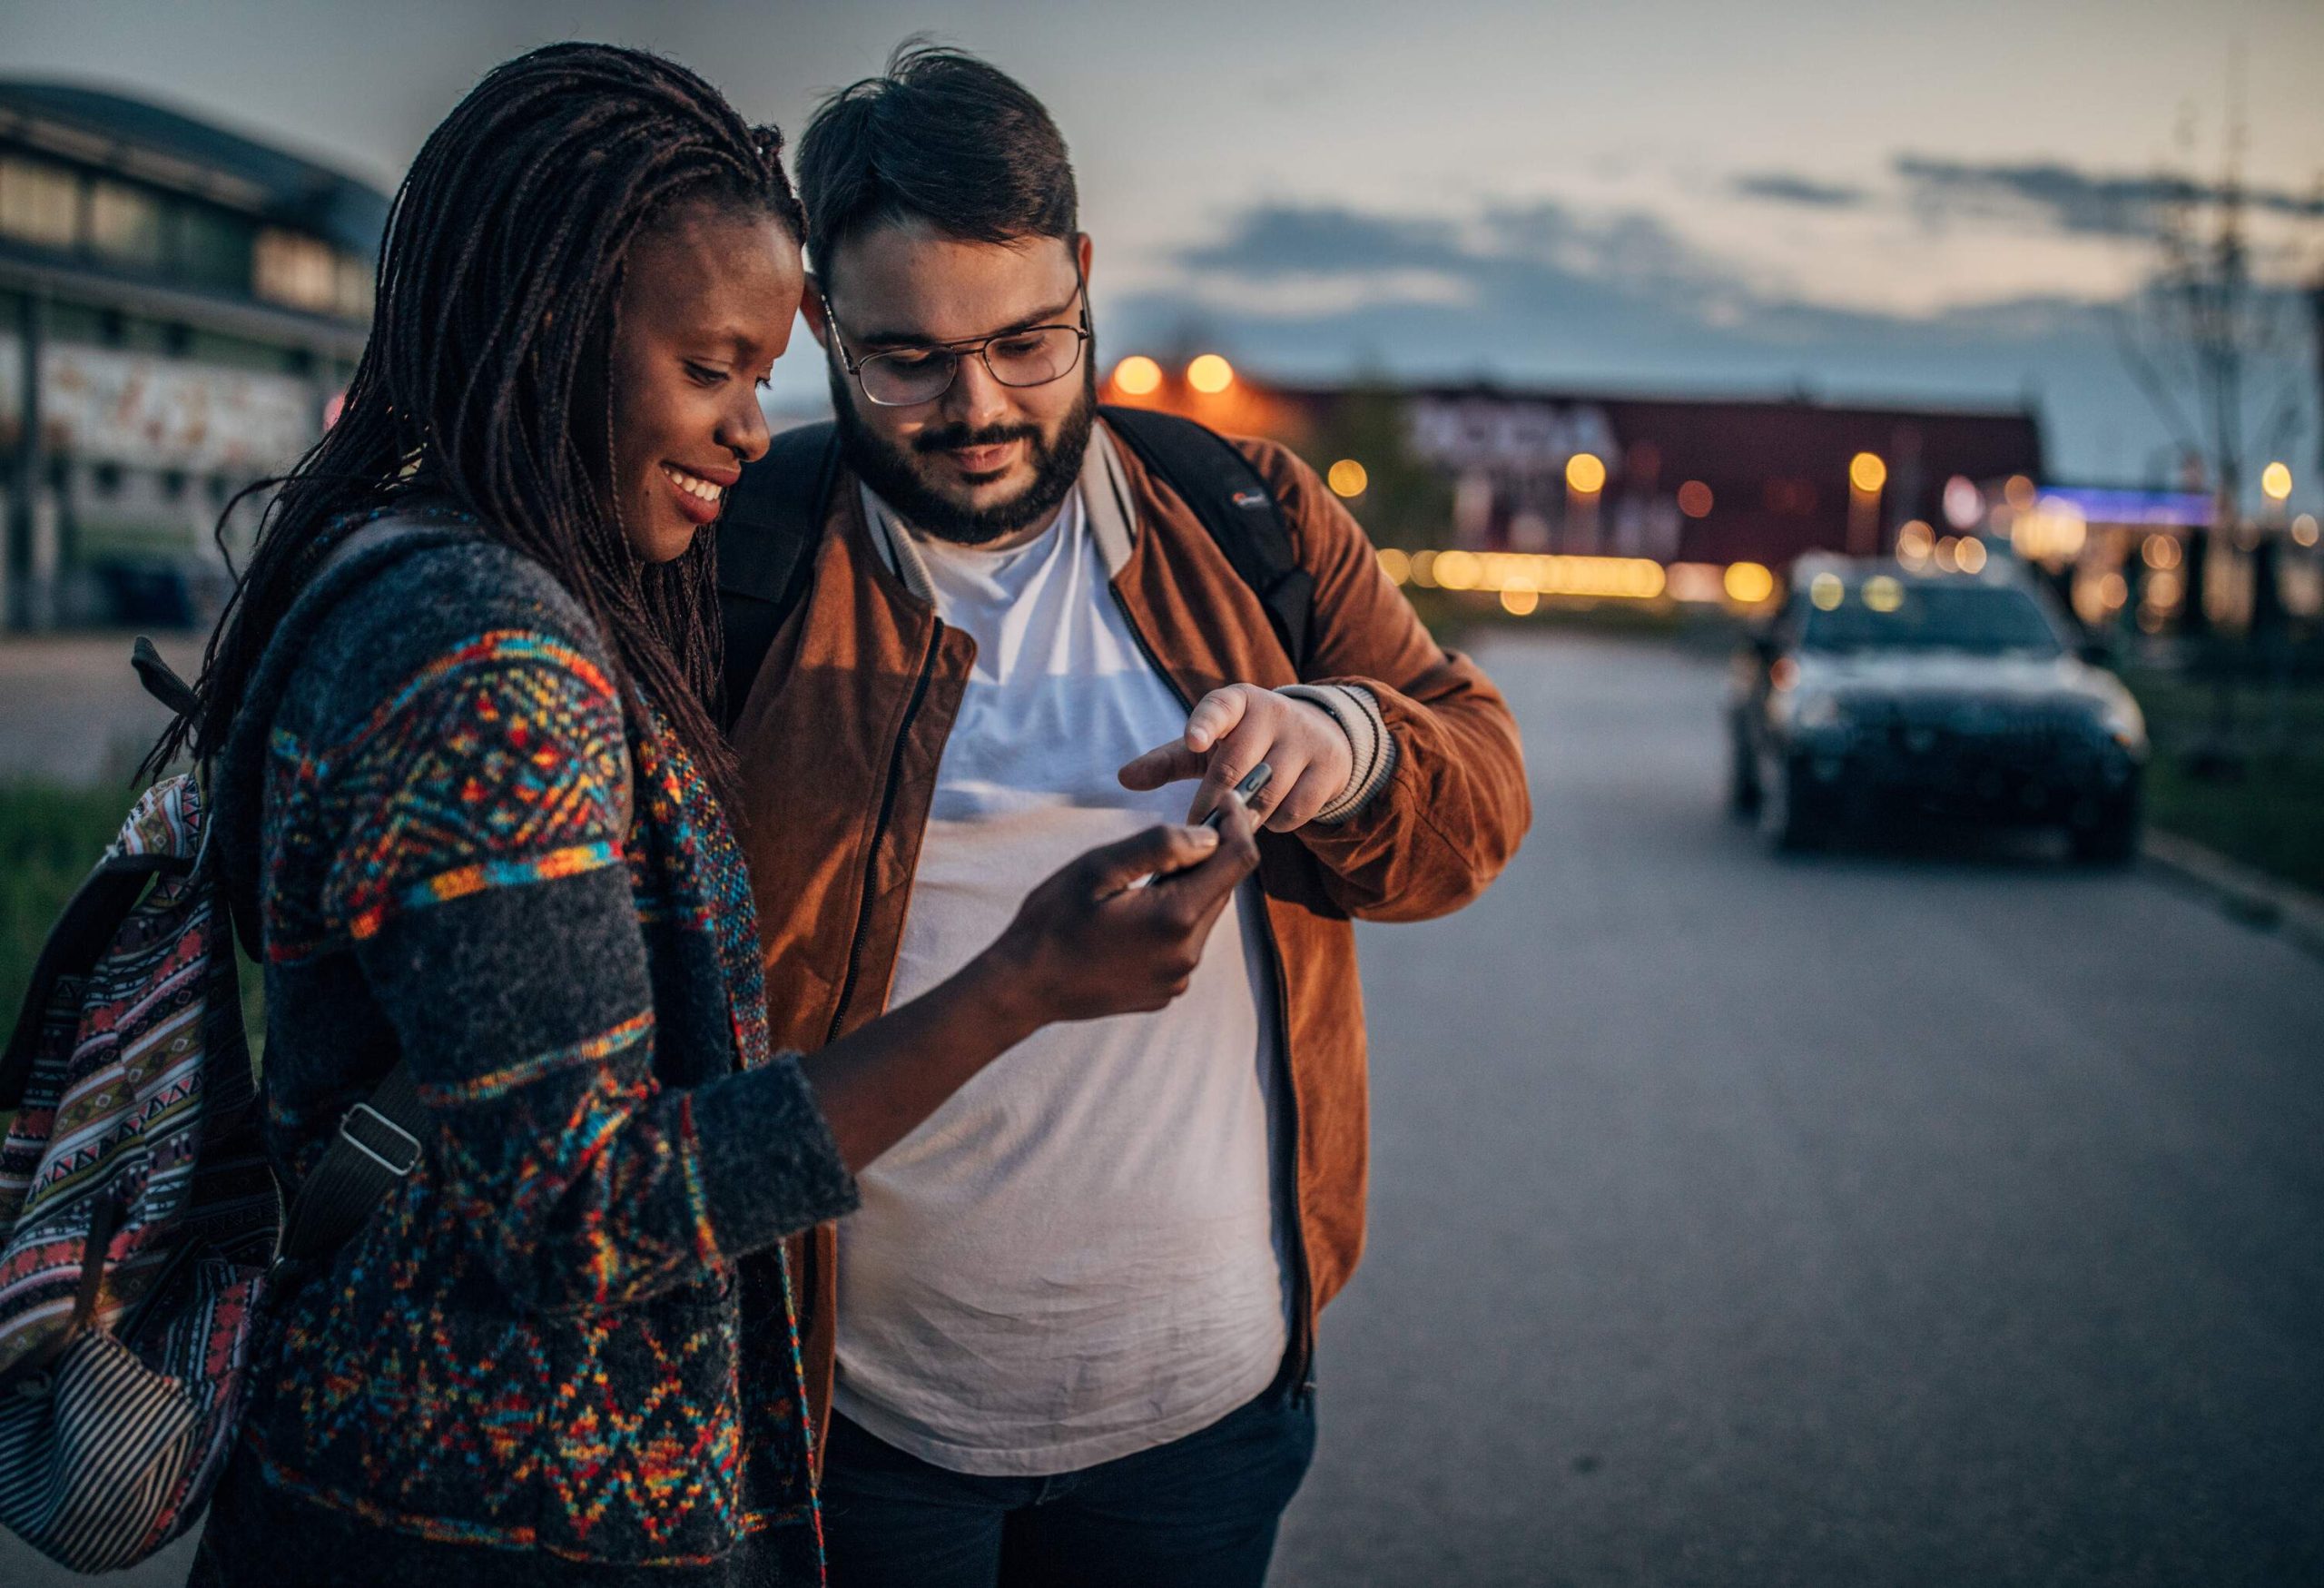 A man and a woman checking on a smartphone while standing on the side of a road.